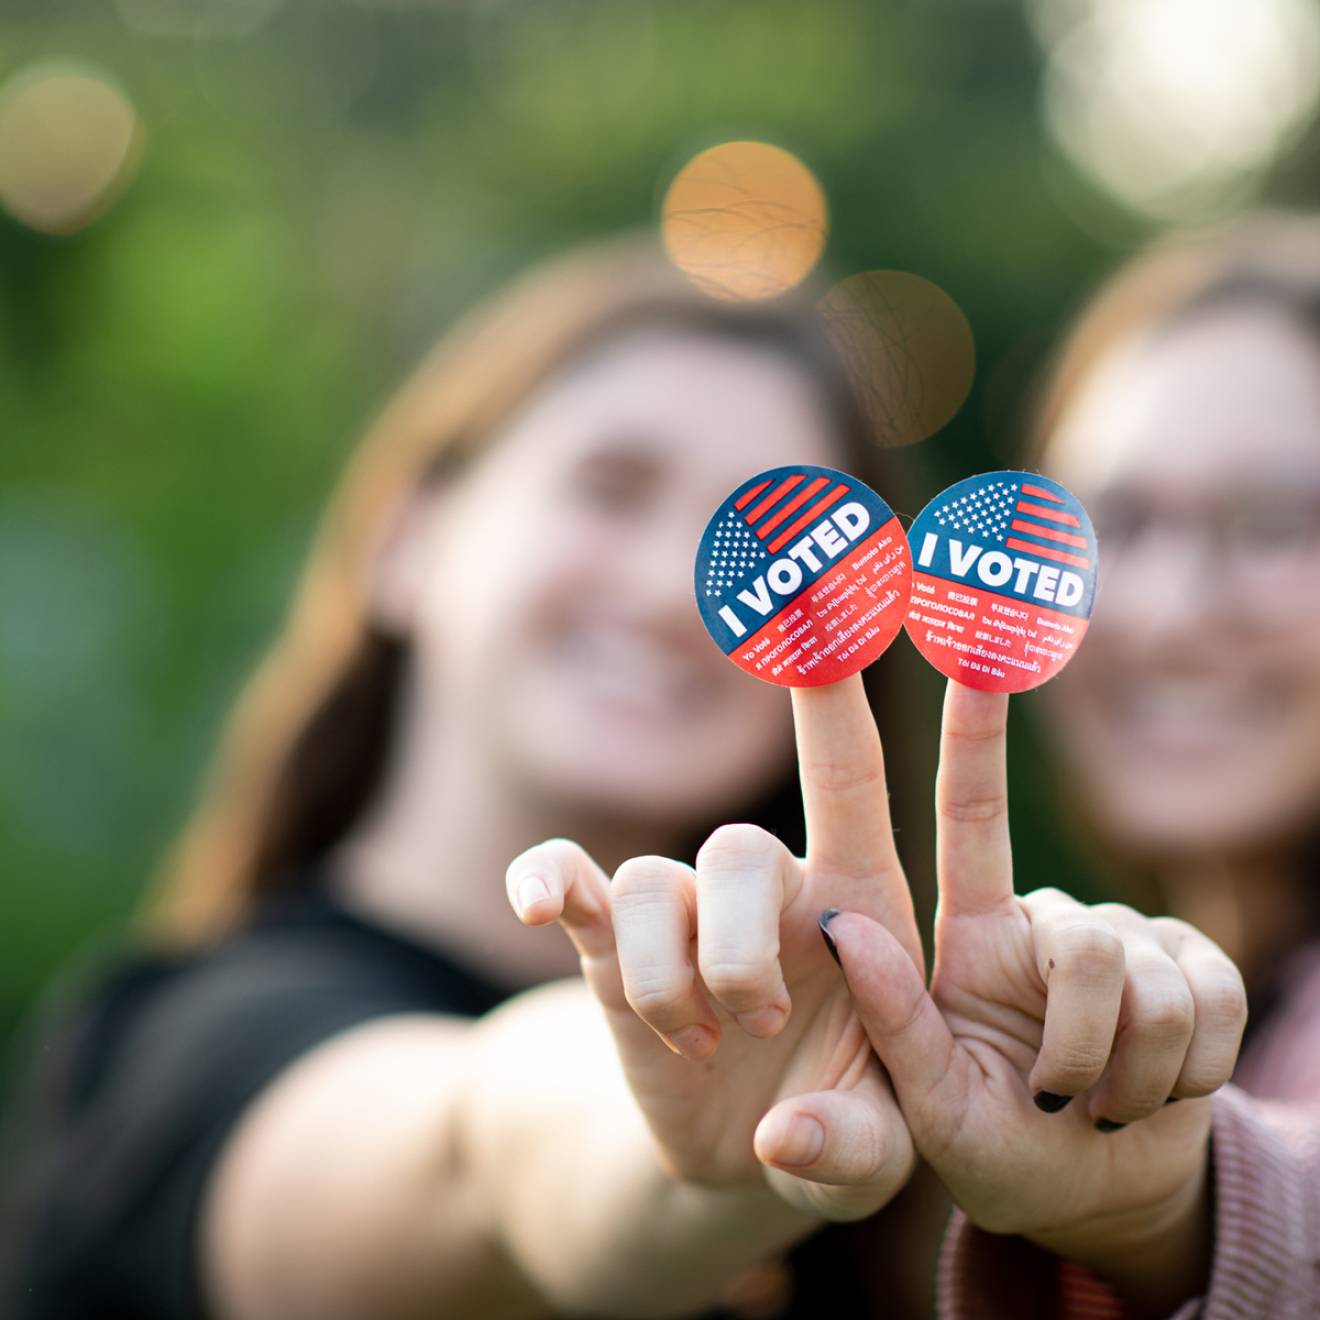 Two young women, mostly out of focus, hold up I Voted stickers to the camera, smilling